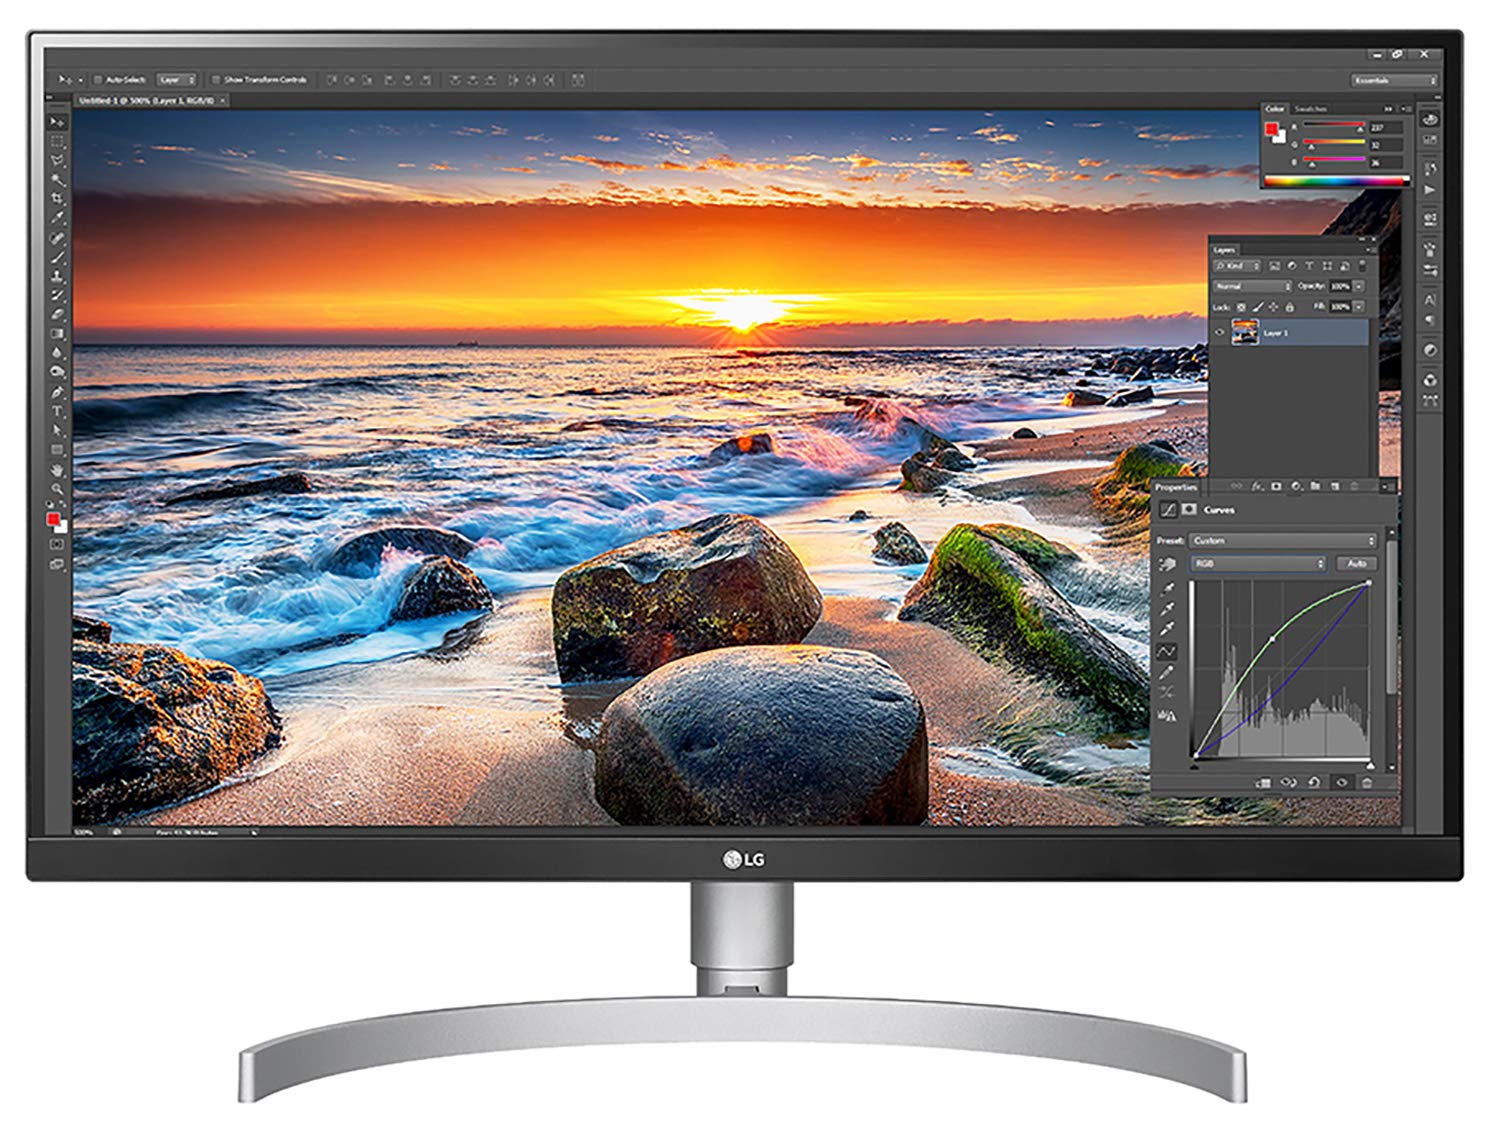 LG’s new 32-inch 4K OLED UltraFine Display for Mac is now accessible to order